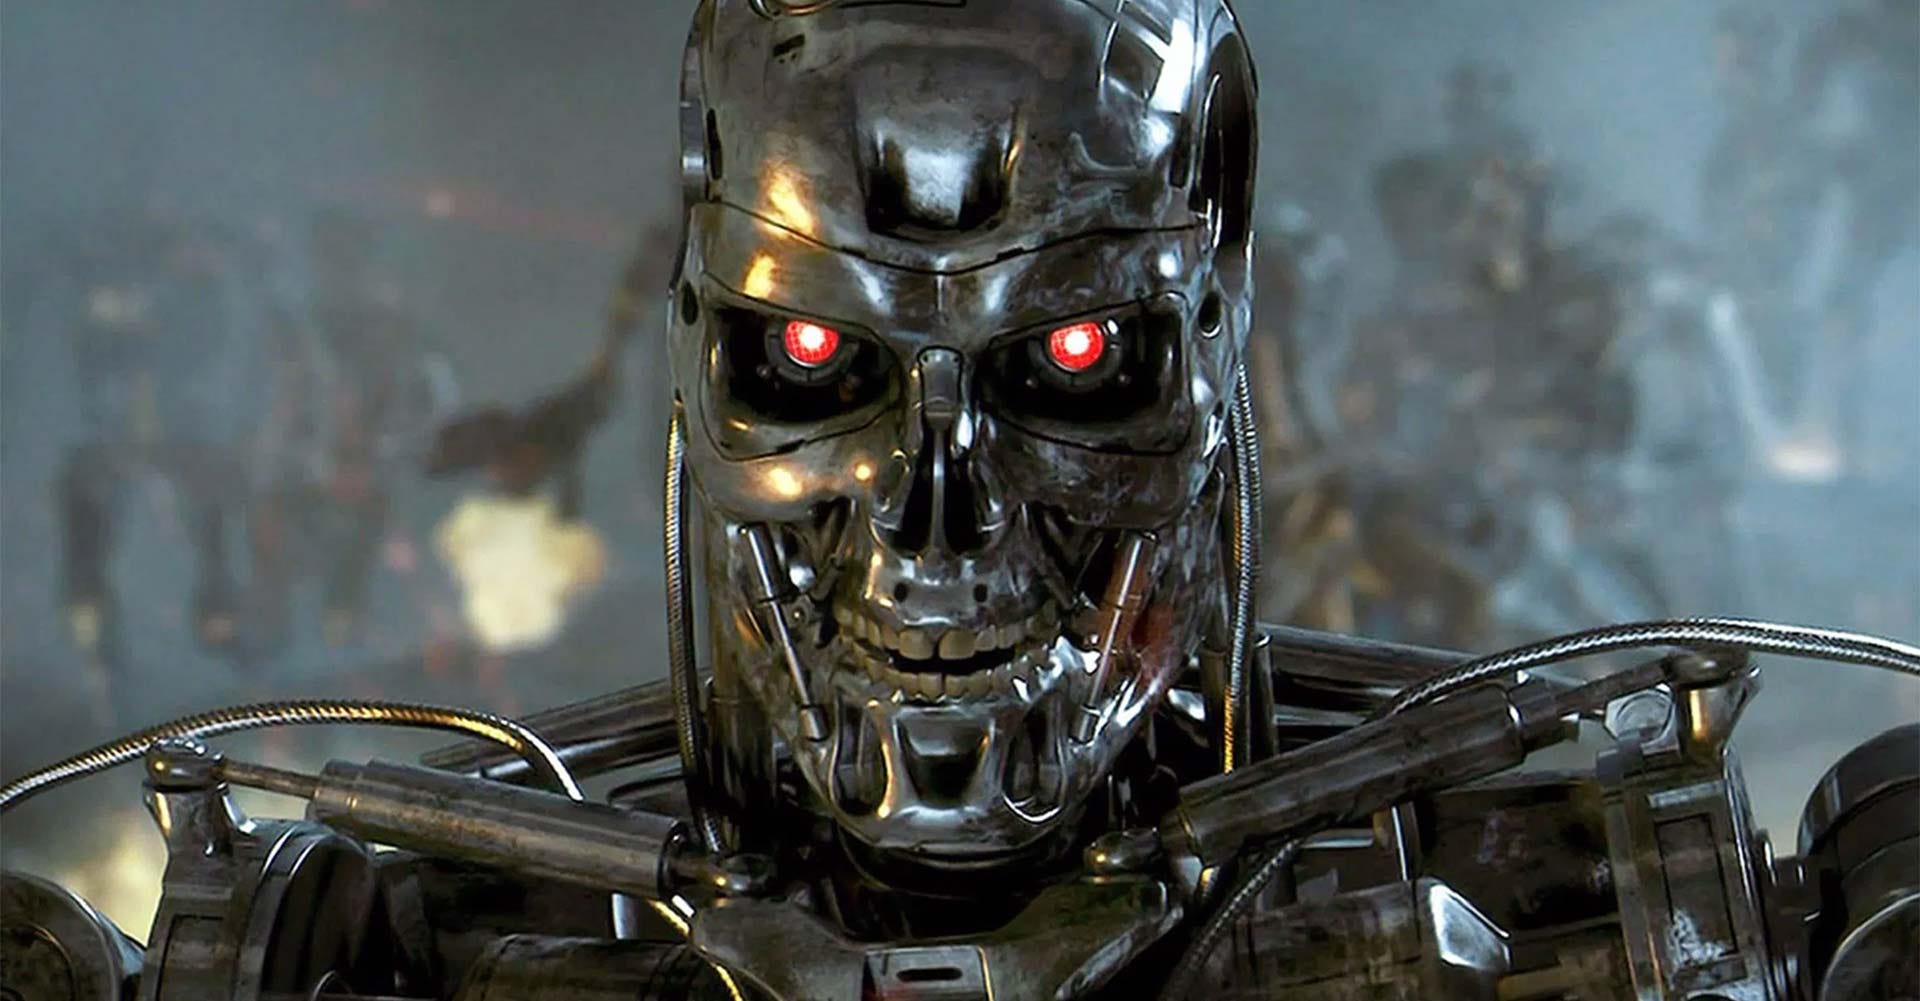 The Terminator Isn T Real But It Will Be Soon Get Ready By Tim Ventura The Startup Medium